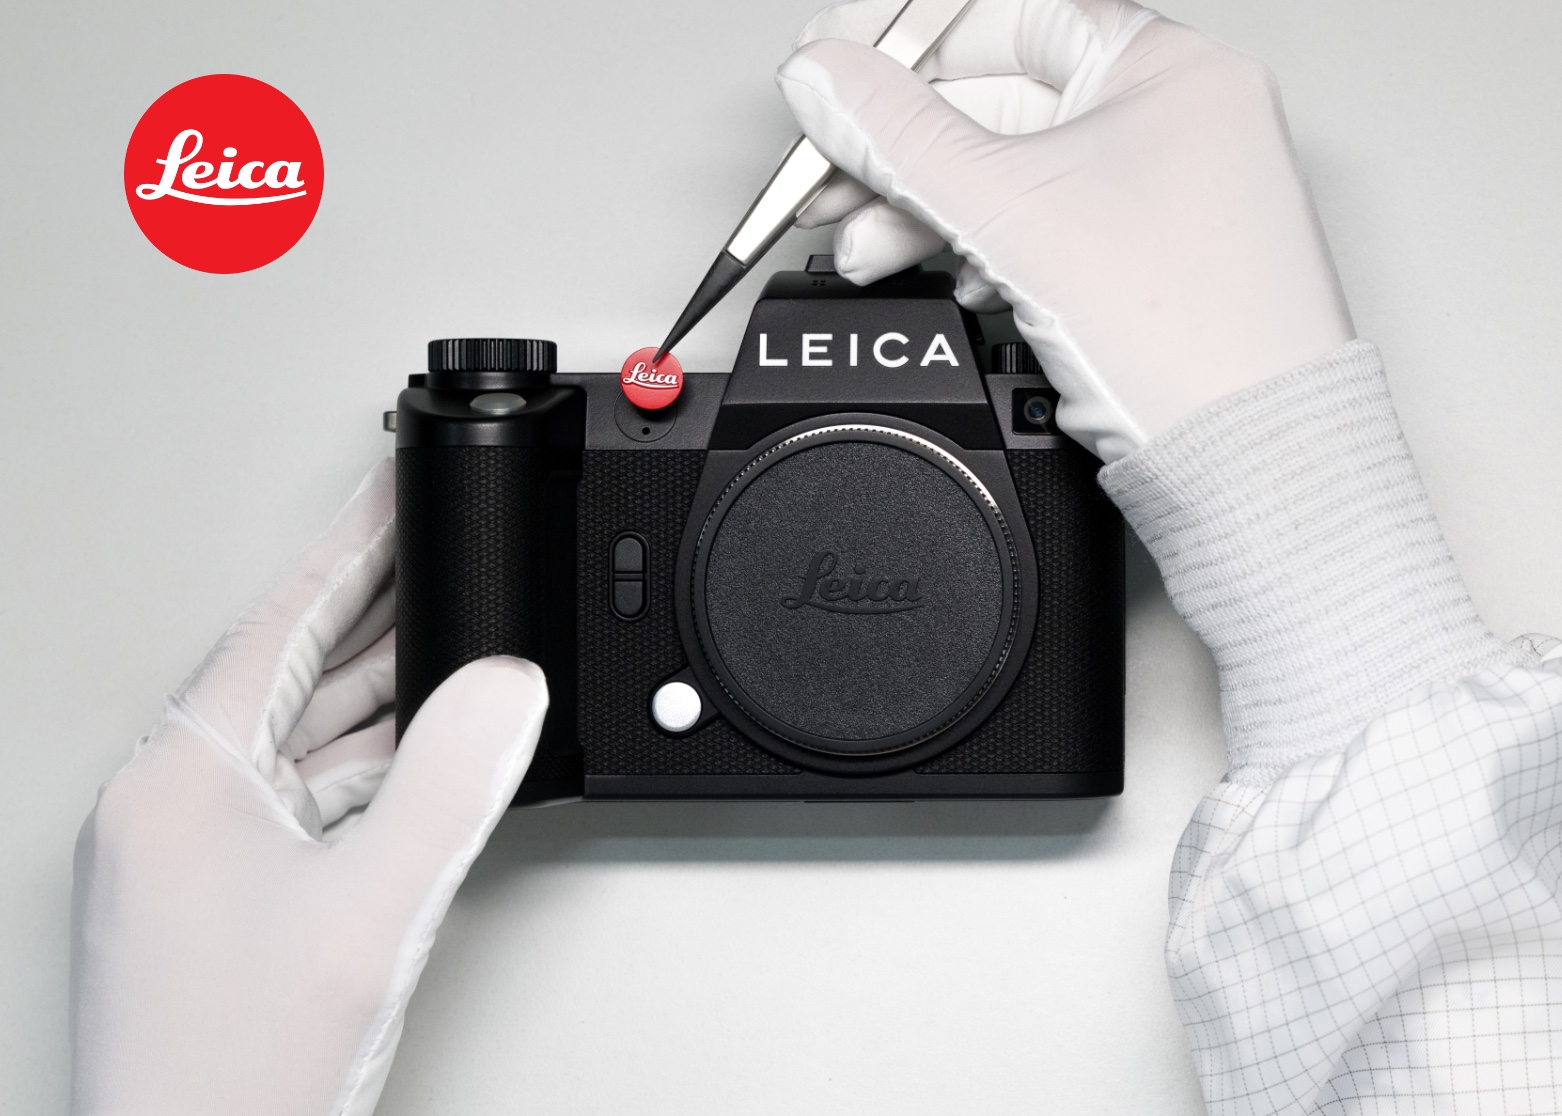 The Leica SL3. Made with care in Germany